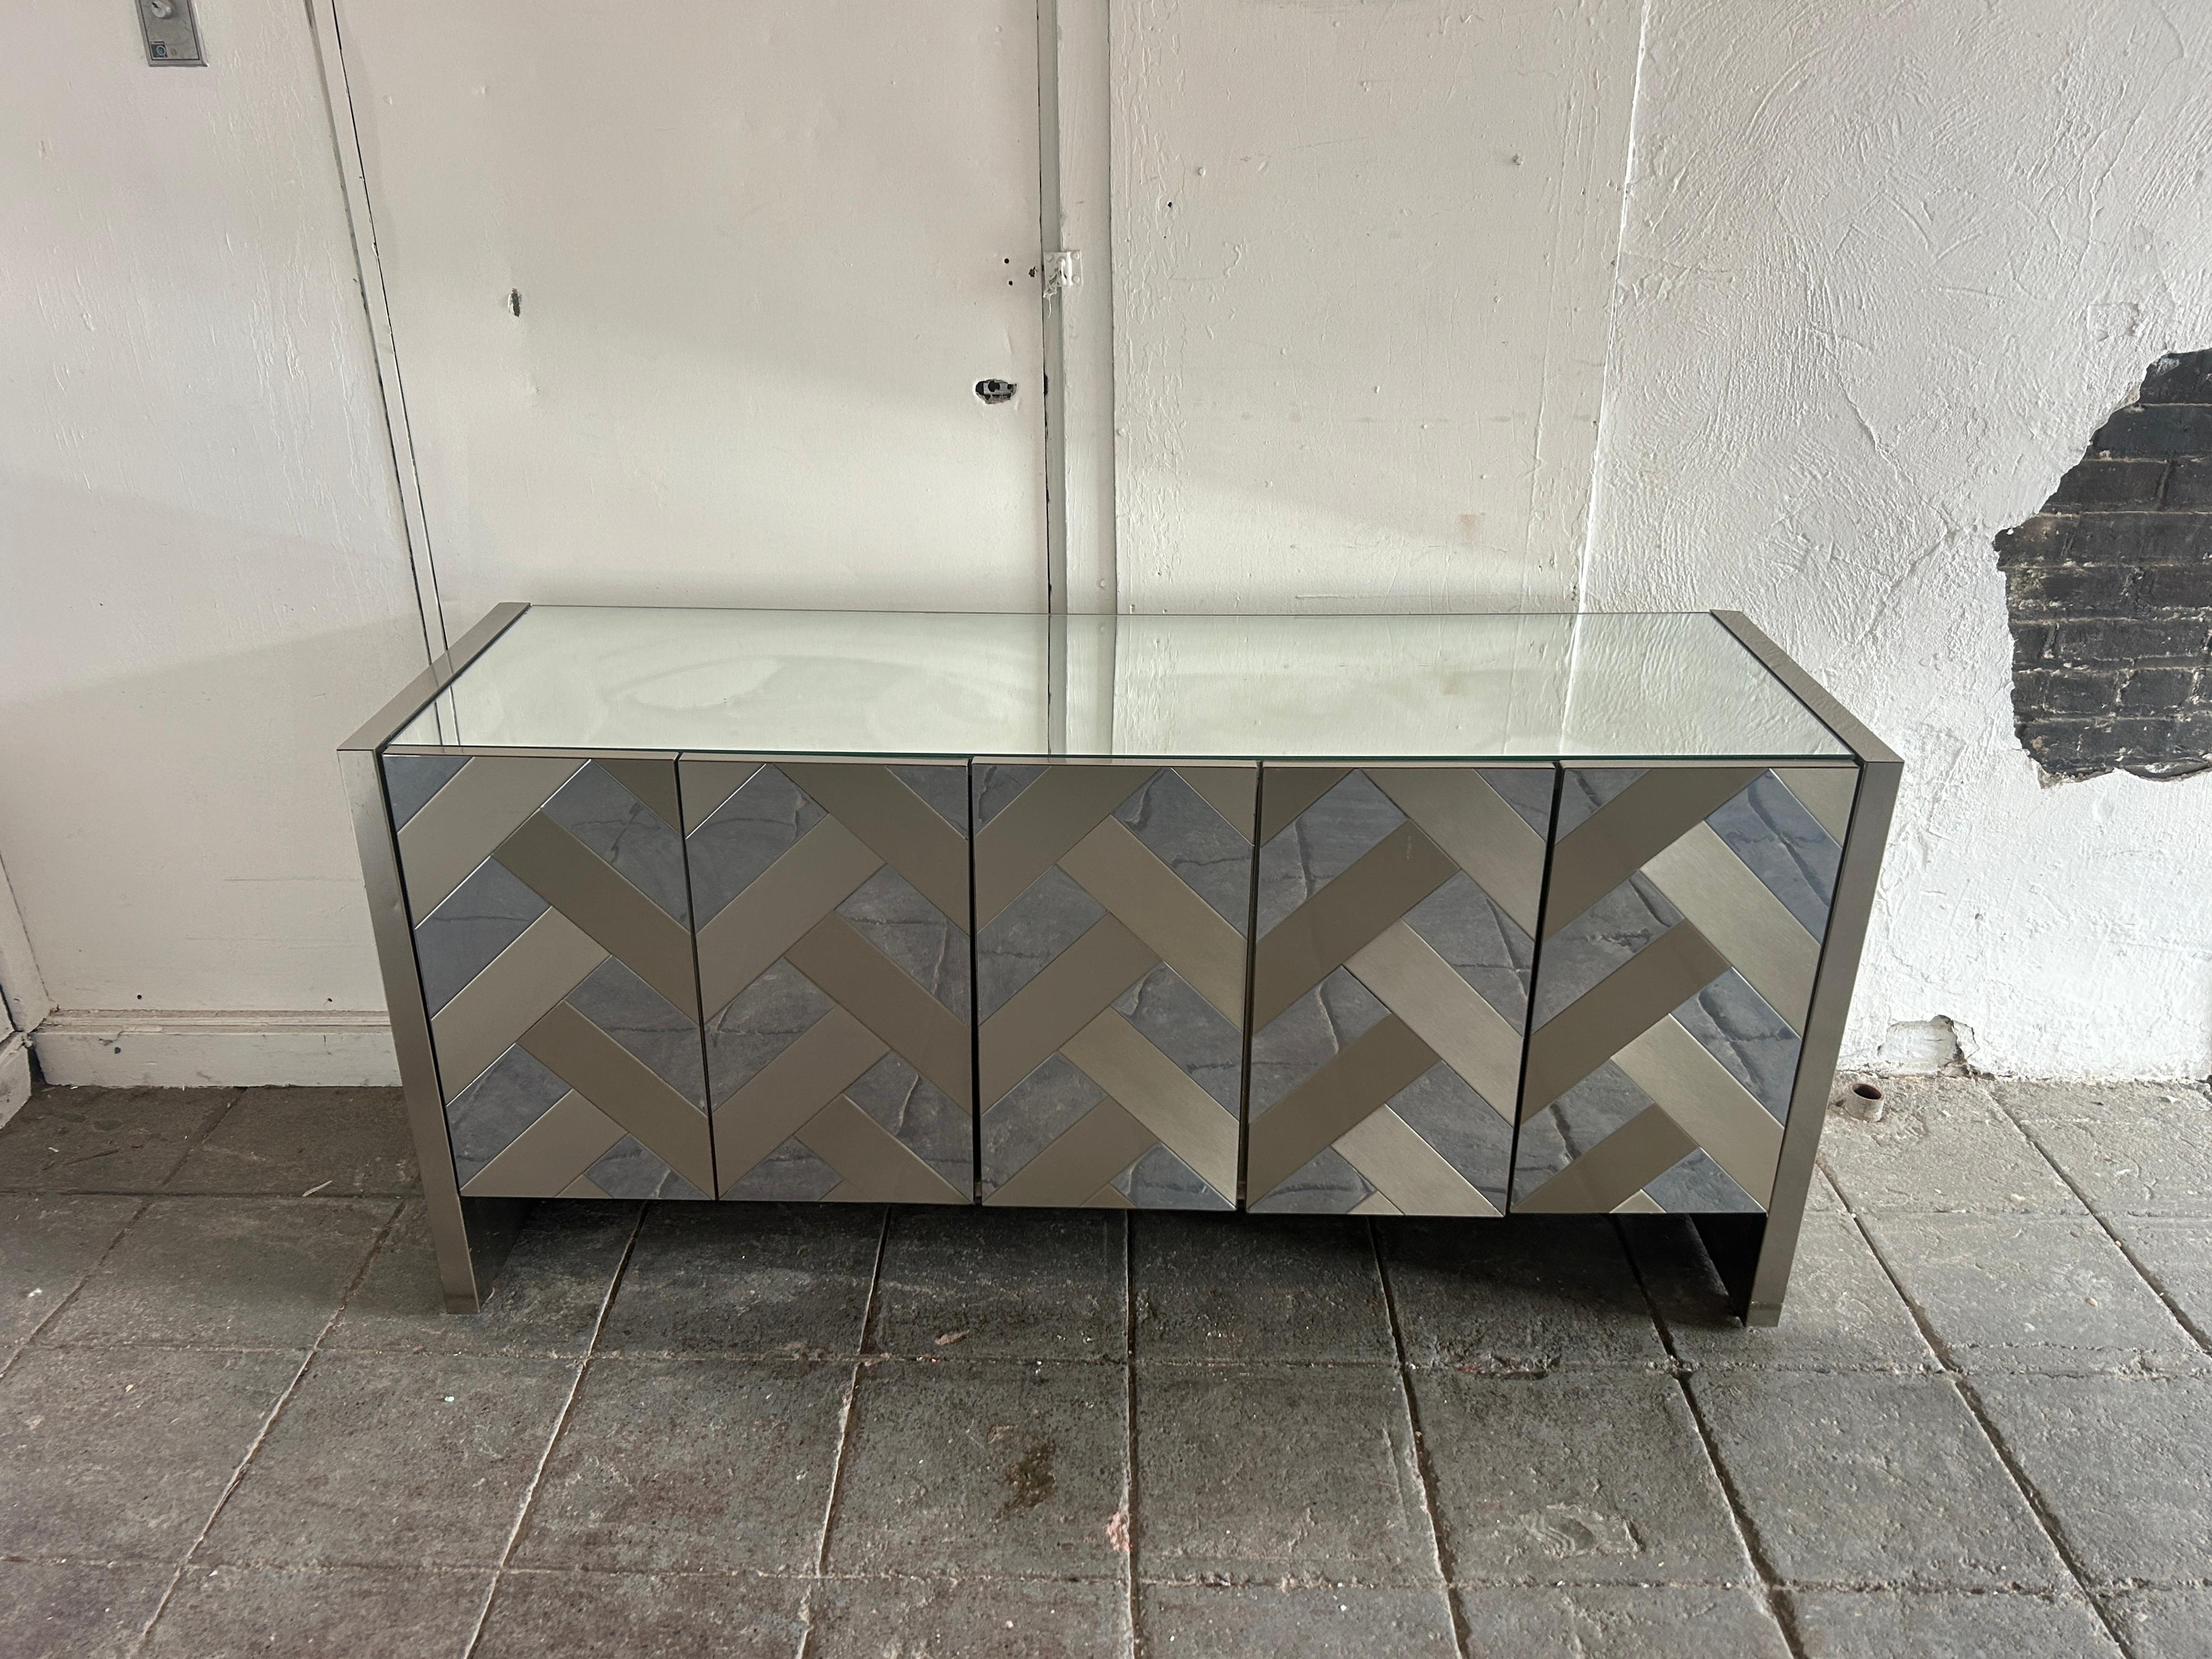 Ello Post Modern Mid century Glass Mirror and bushed metal 5 door Credenza or sideboard C. 1980s. Long low Glass Mirror and brushed metal cross hatched Credenza with 5 cabinet doors. Has white laminate inside with chrome accents. Come with (2) white